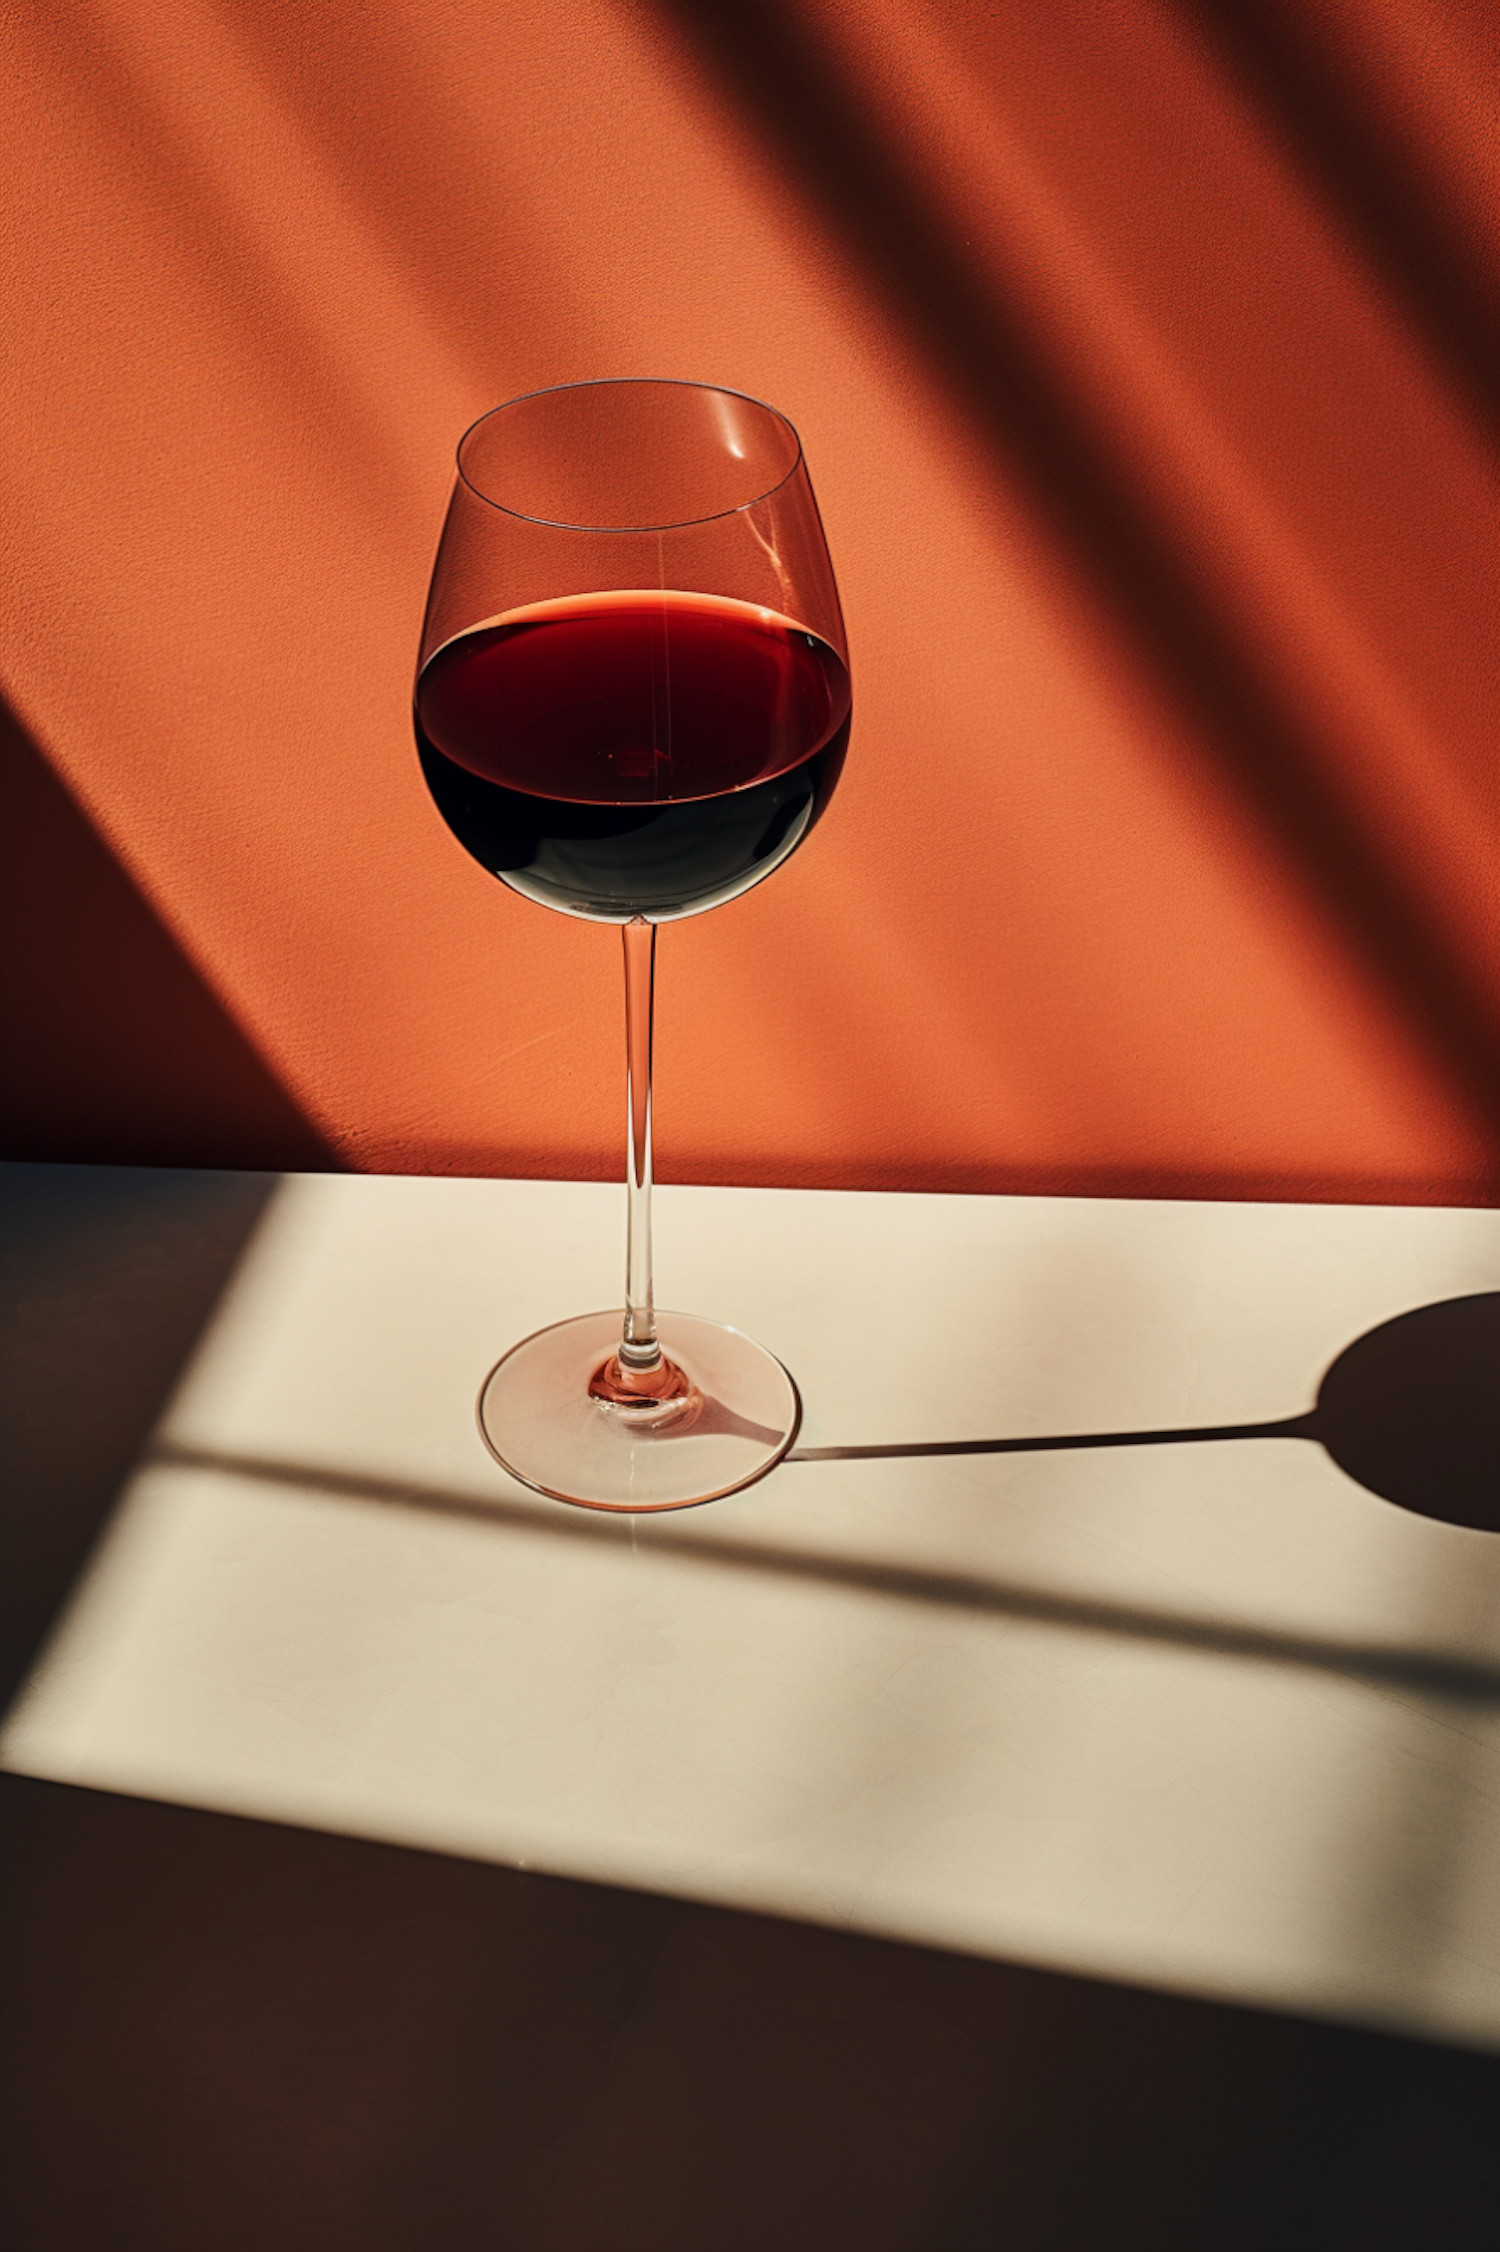 Sophisticated Sip: A Study of Light, Shadow, and Red Wine